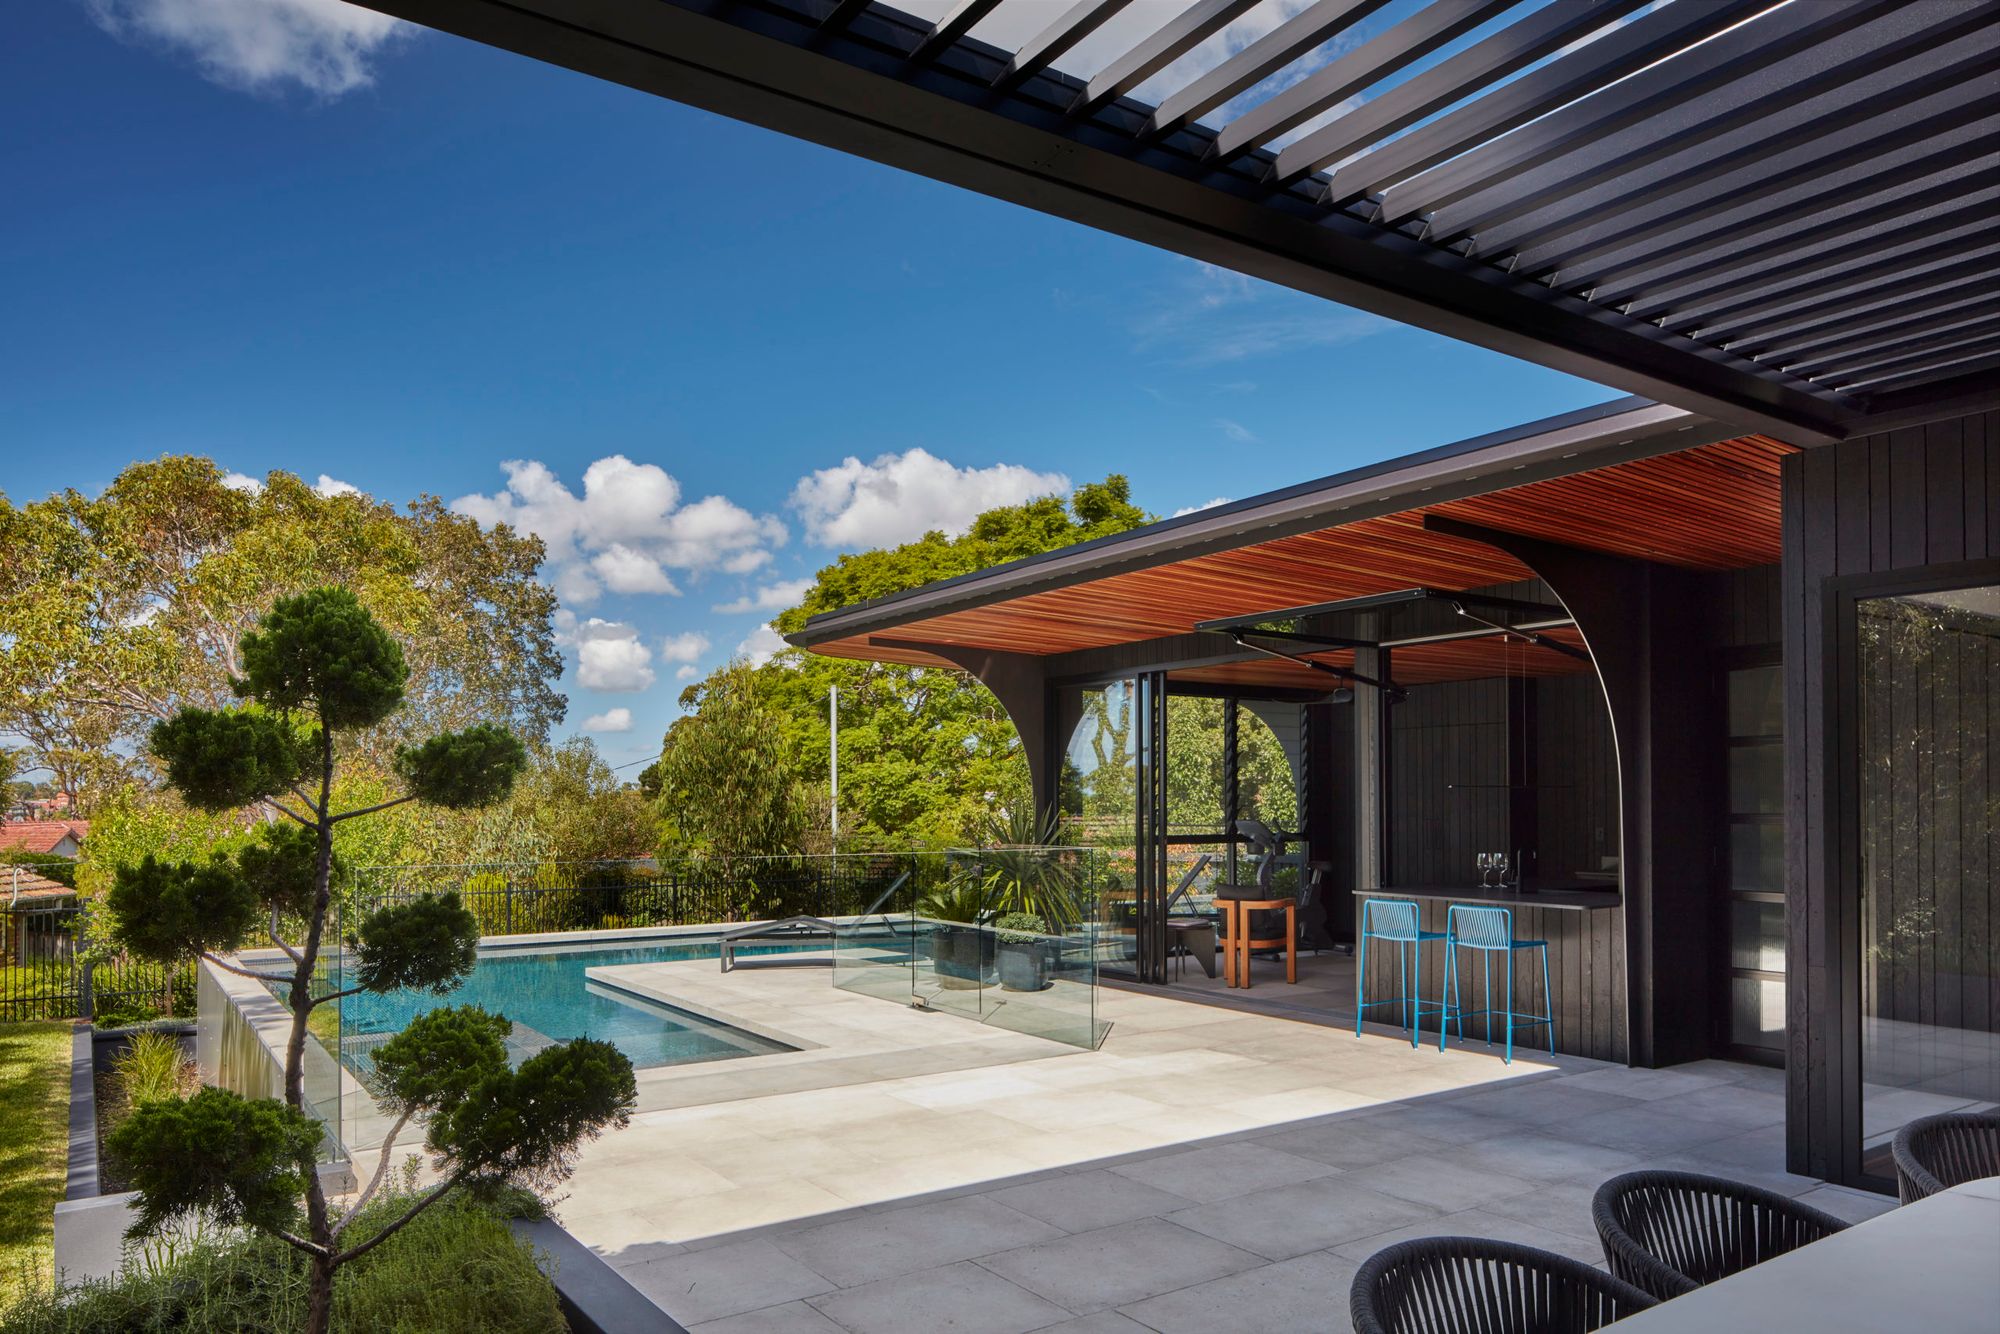 The Pavilion Castlecrag by McNally Architects. Outdoor entertaining space, with pool